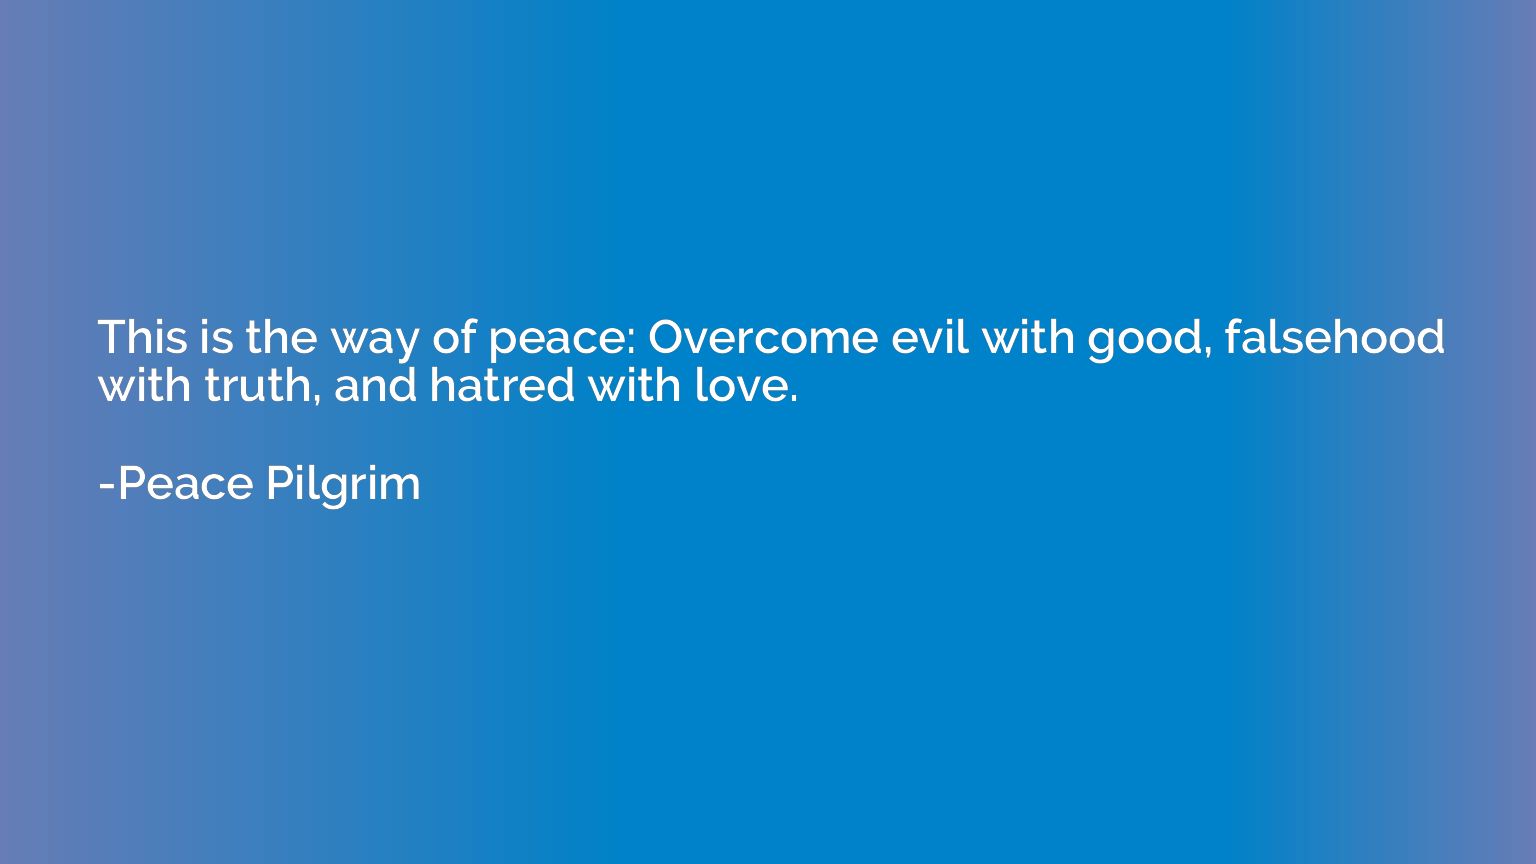 This is the way of peace: Overcome evil with good, falsehood